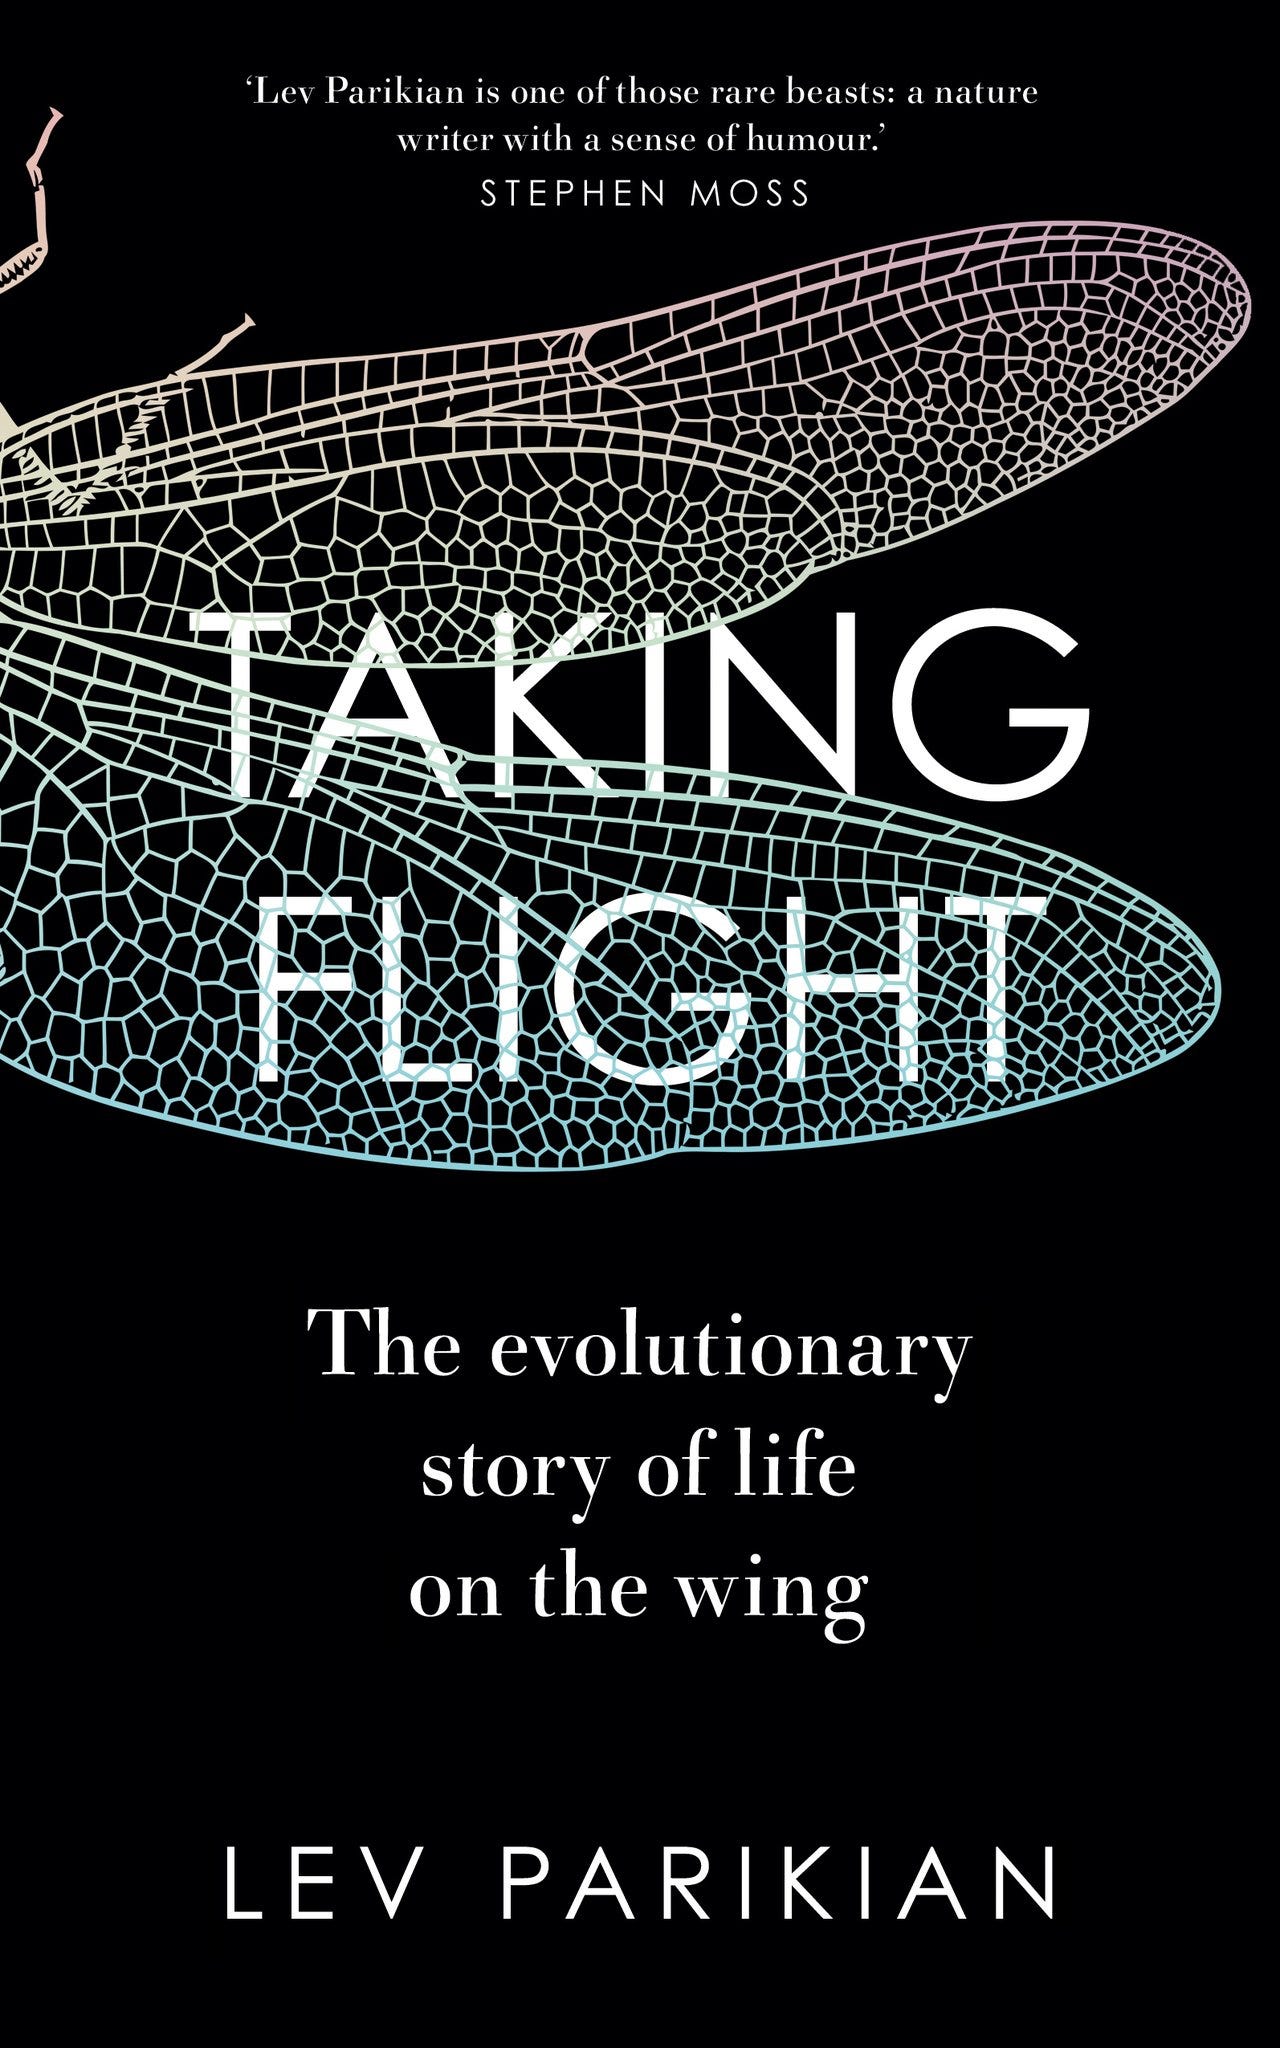 The cover of Taking Flight. Black, with two dragonfly wings in all their lacy glory.